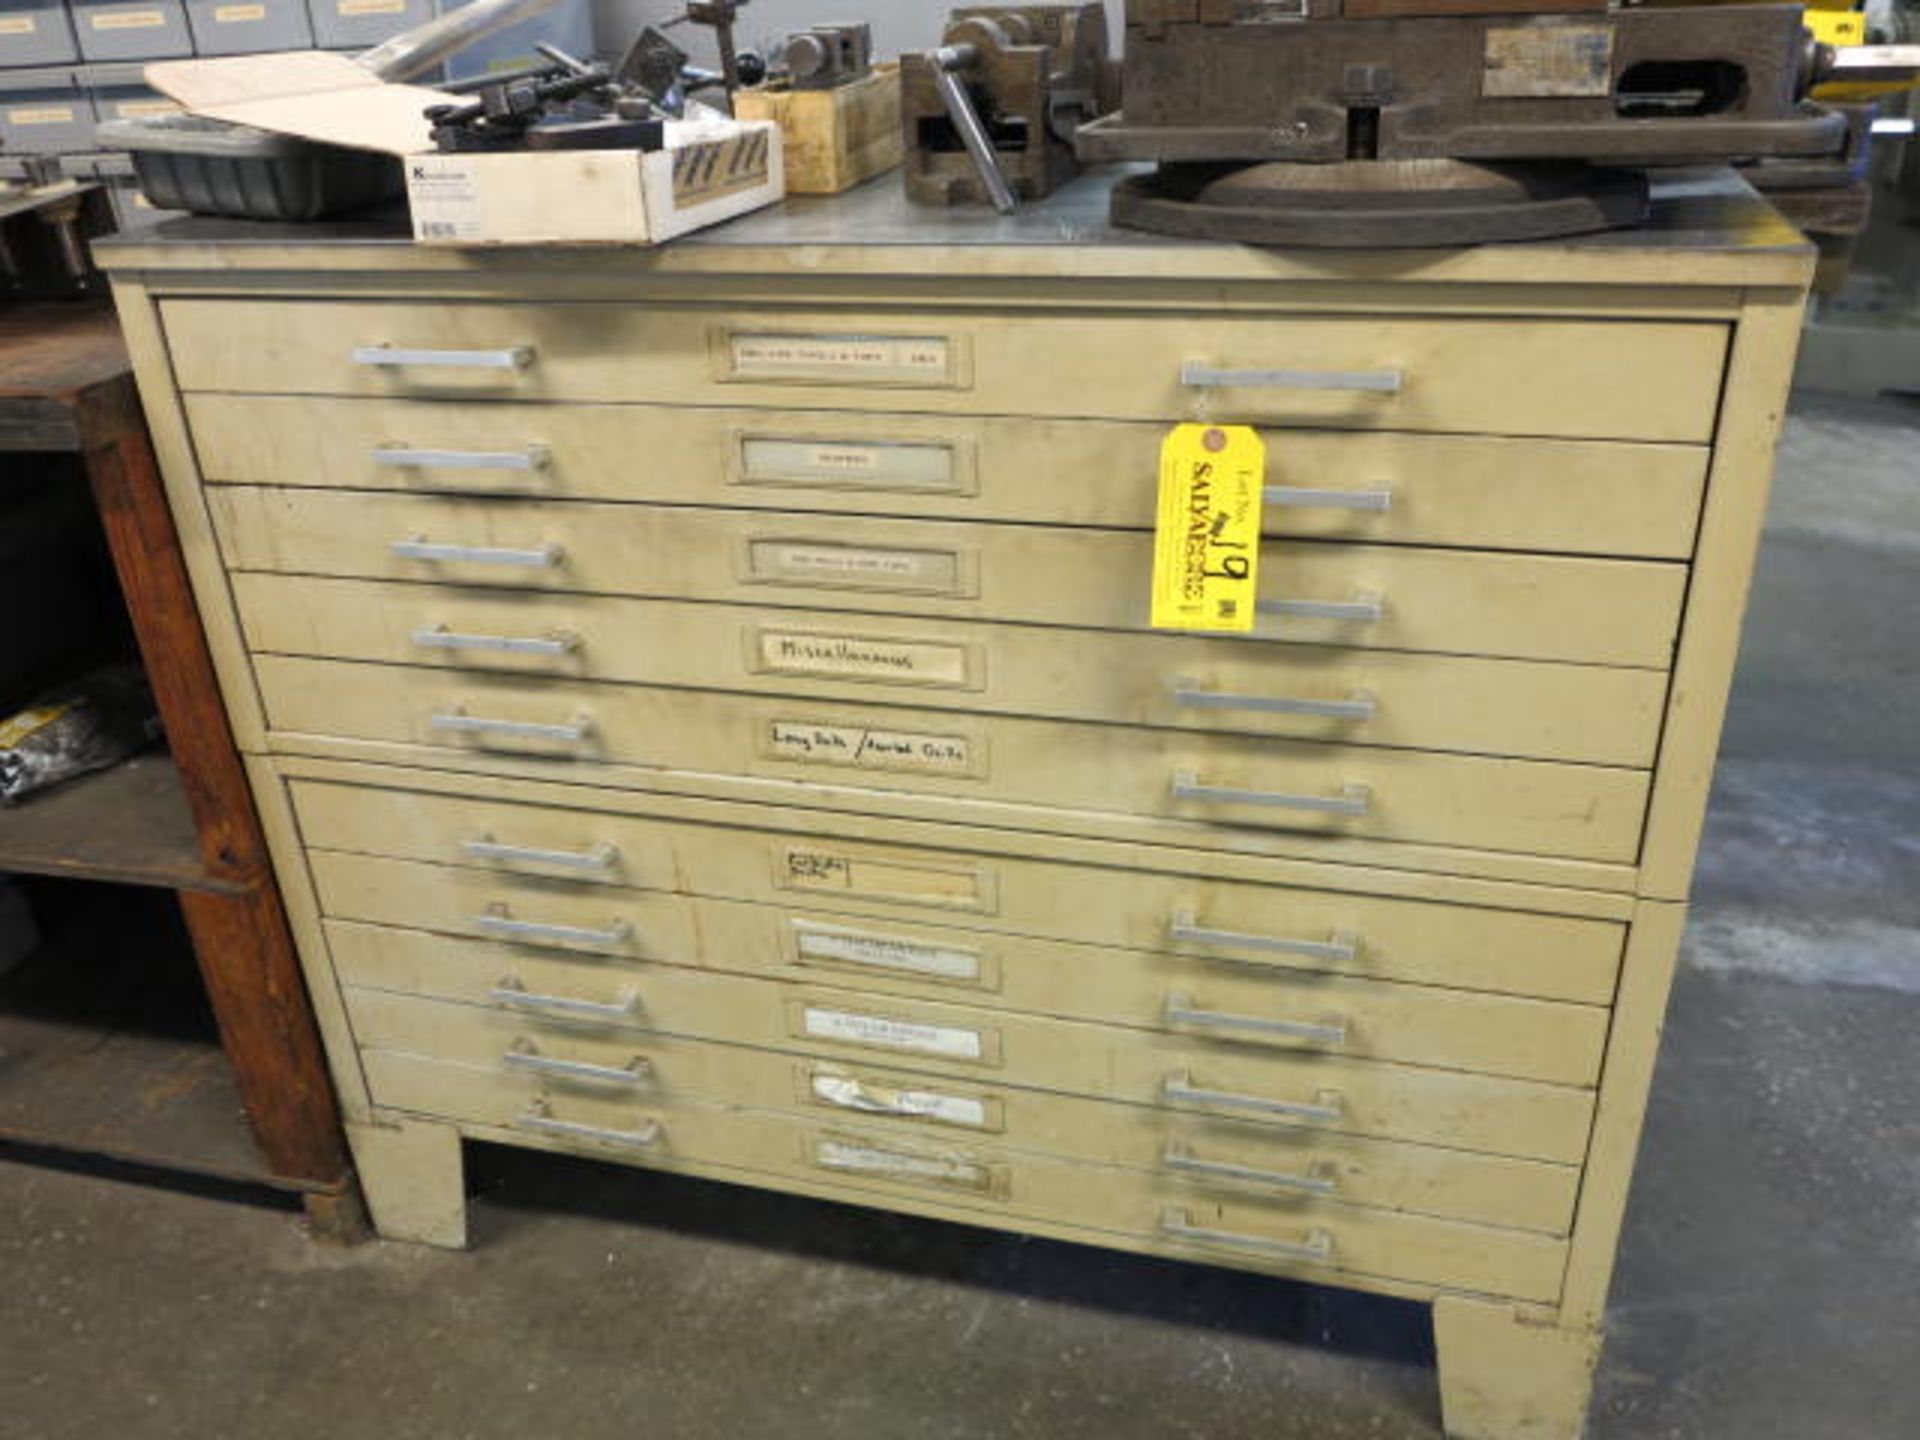 Lot (2) 5 Drawer Cabinets with End Mills Location: Elmco Tool 3 Peter Rd Bristol, RI - Image 2 of 2